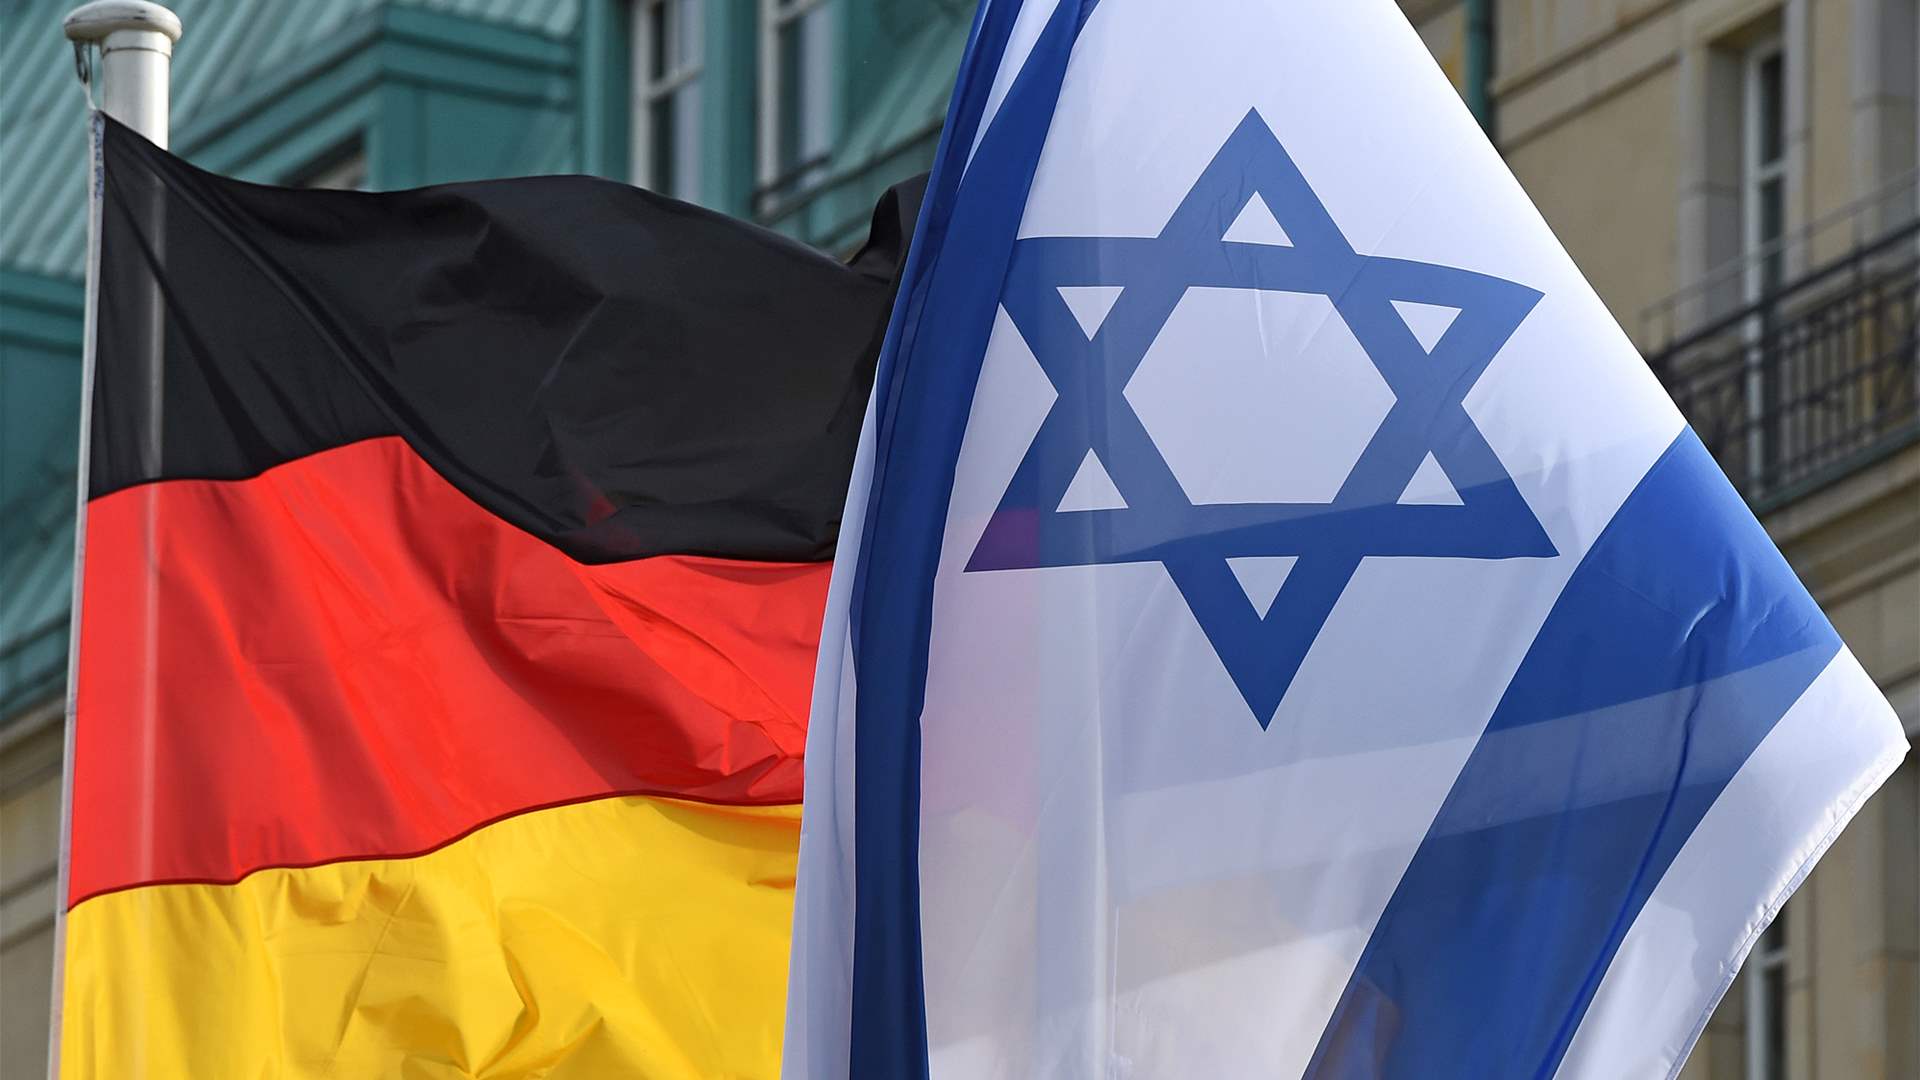 Germany: We expect Israel to provide safe spaces for civilians in Gaza